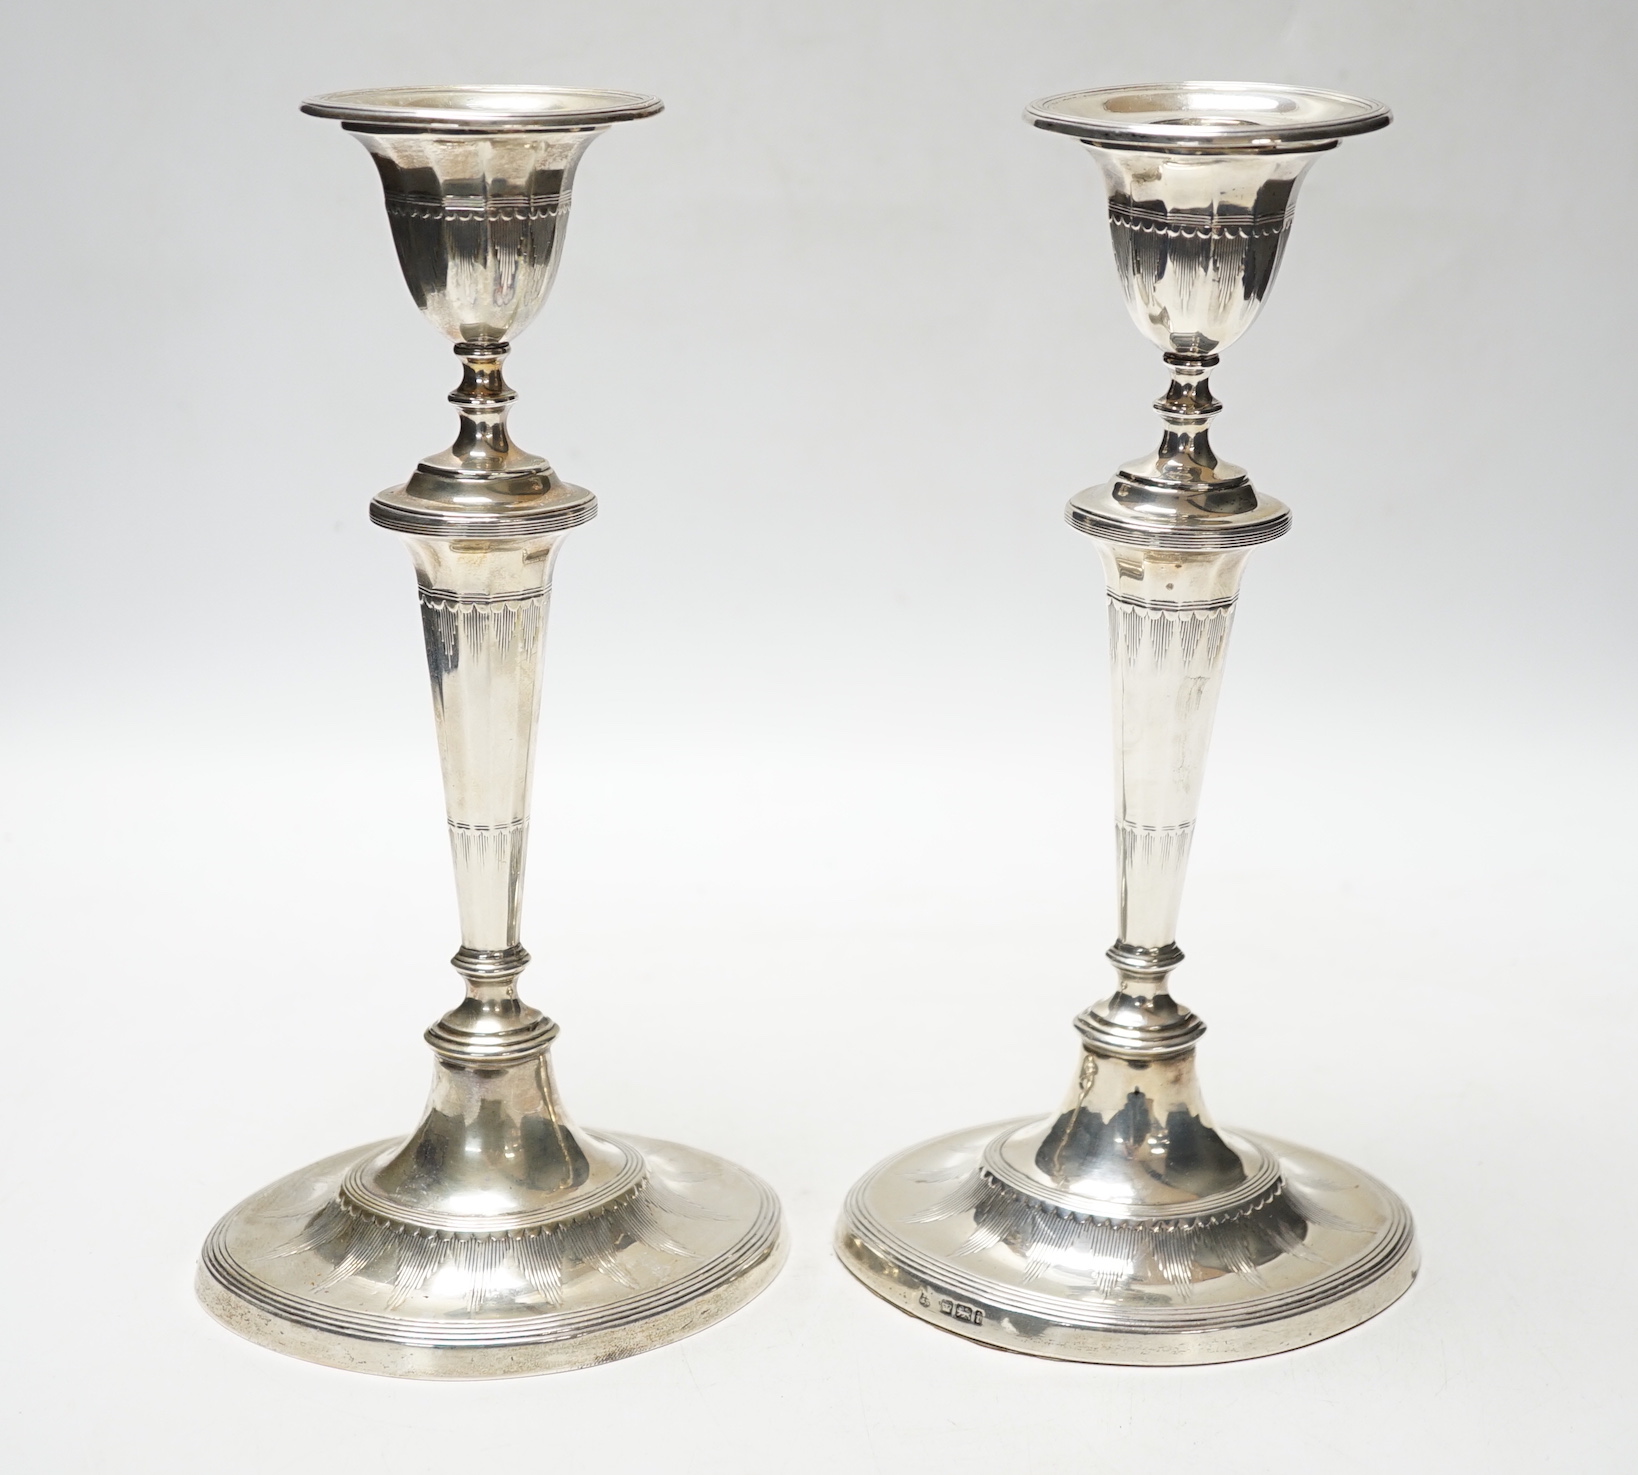 A pair of Edwardian silver mounted oval candlesticks, Thomas Bradbury & Sons, Sheffield, 1901, 23.4cm, weighted.